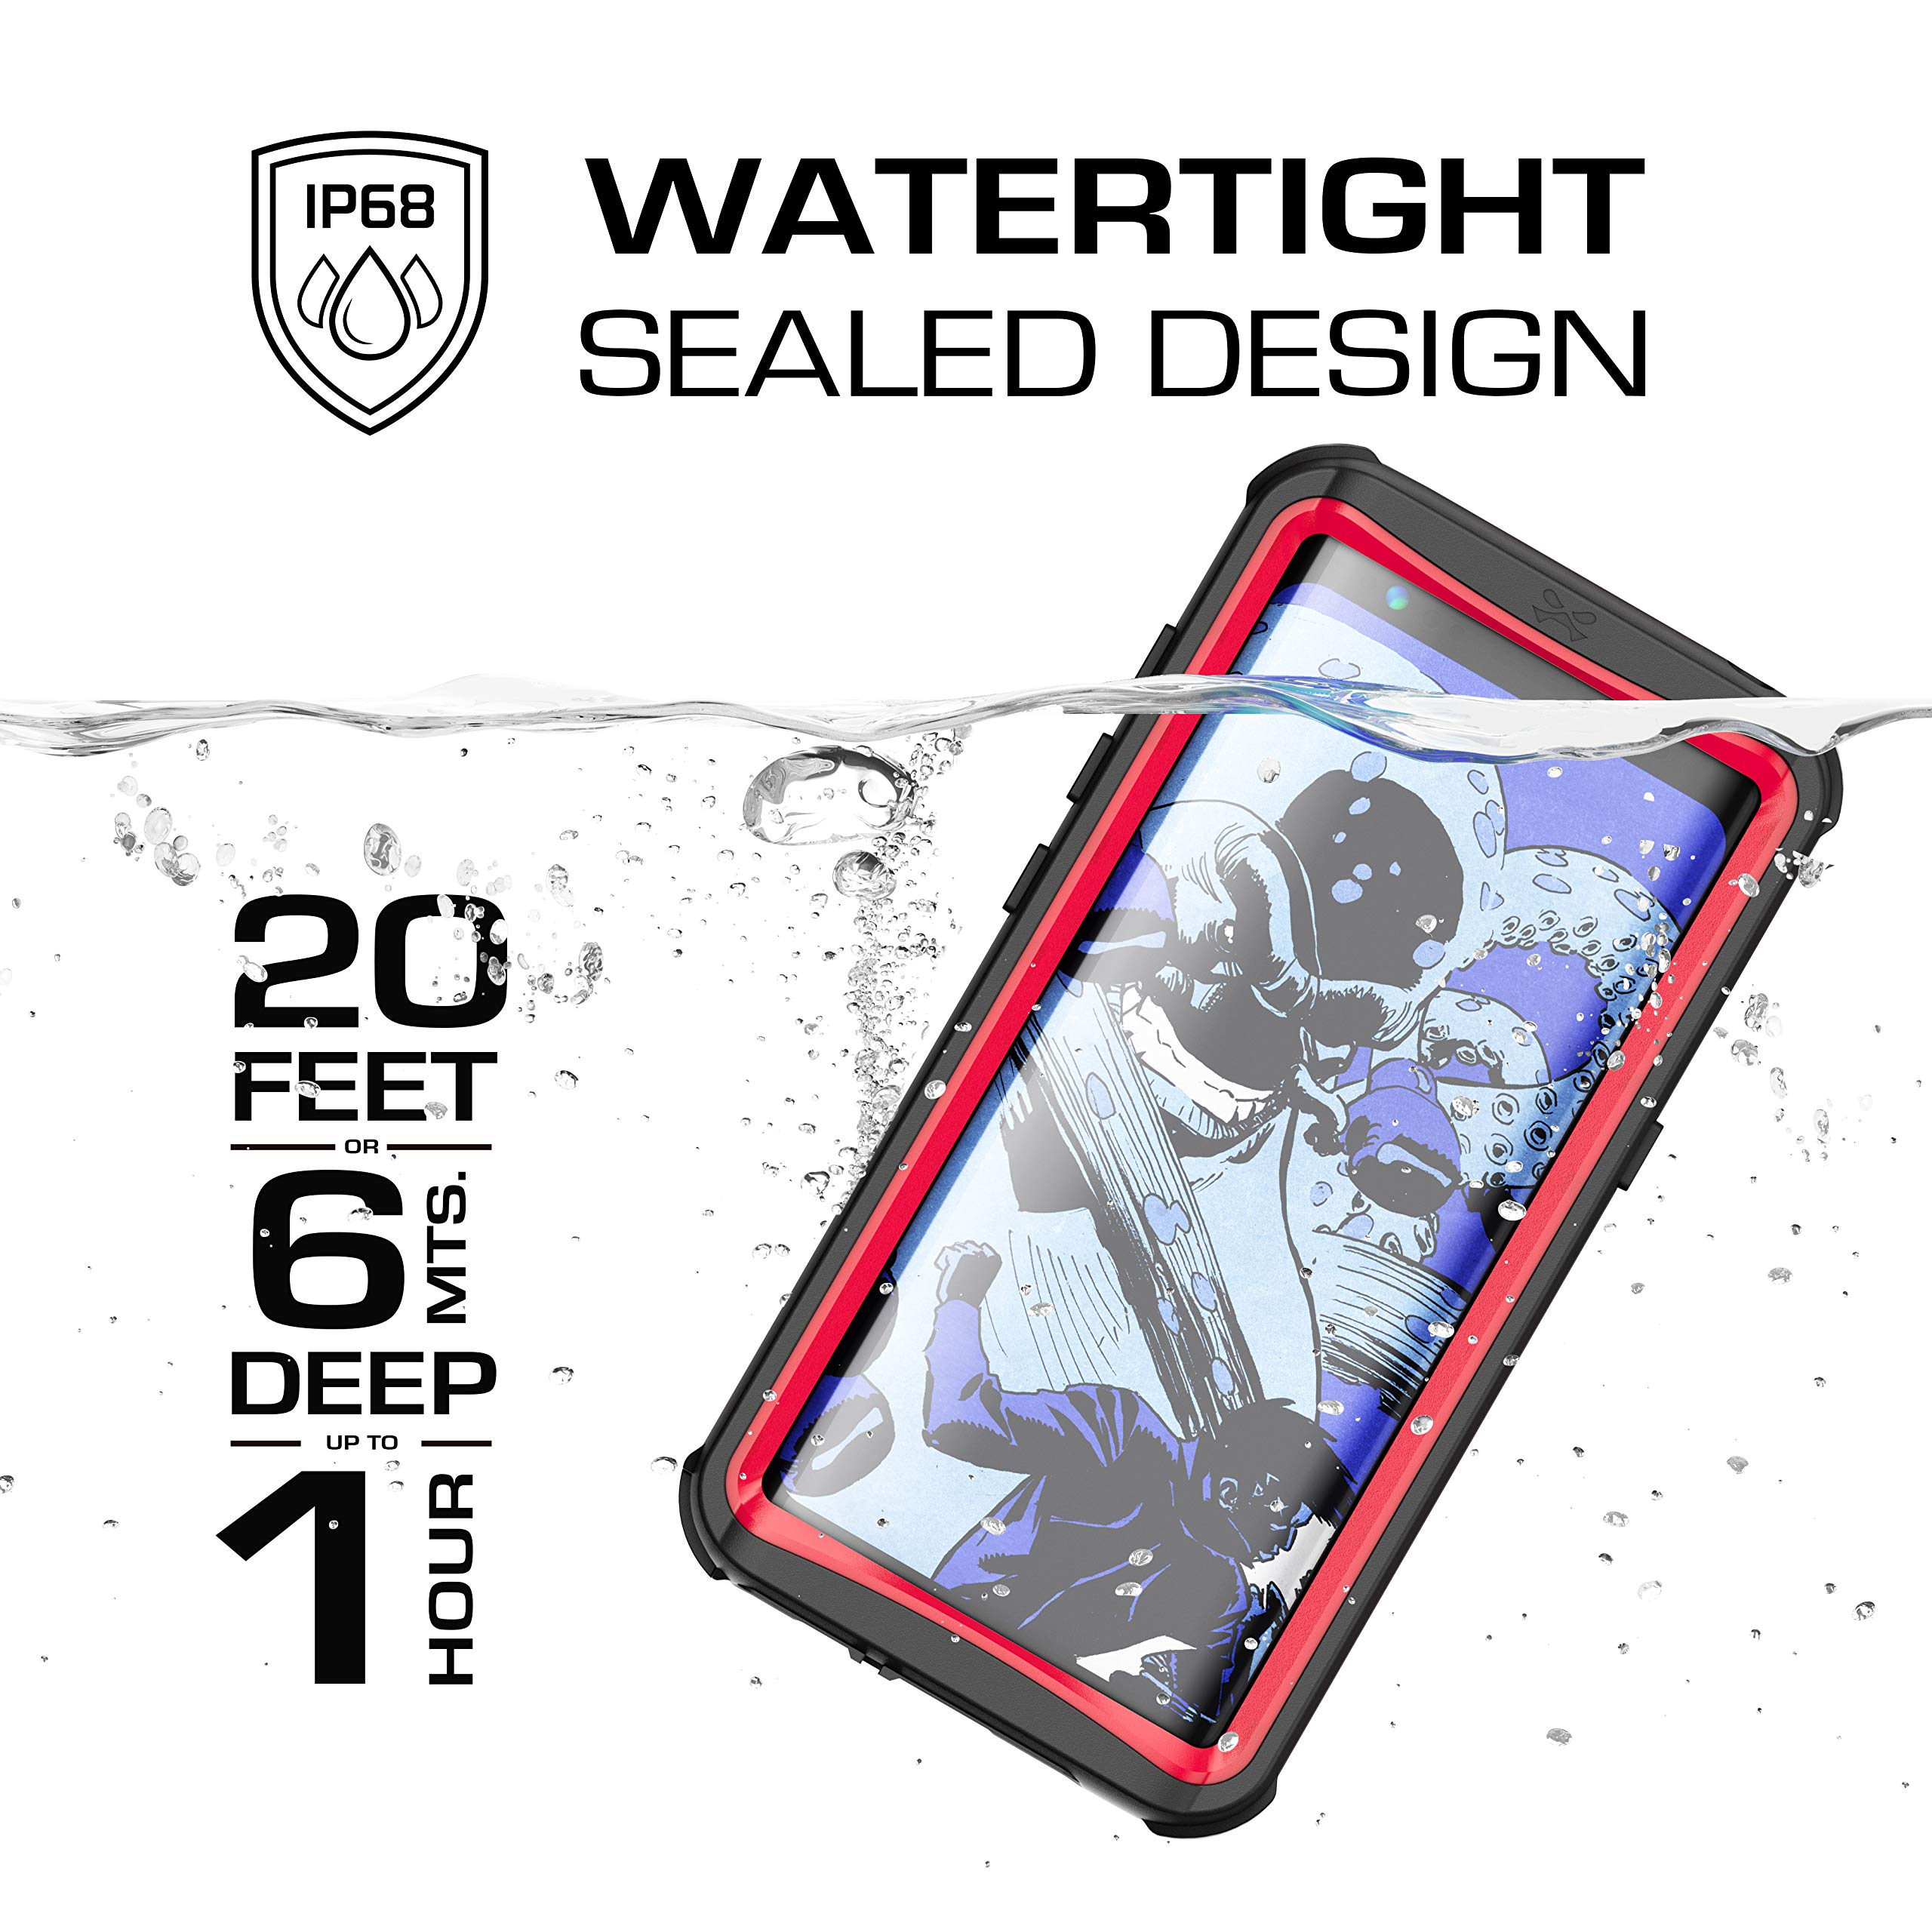 Ghostek Nautical Galaxy S8 Waterproof Case with Screen Protector Extreme Heavy Duty Protection Full Body Shell Underwater Watertight Seal Shockproof Designed for 2017 Galaxy S8 (5.8 Inch) - (Red)